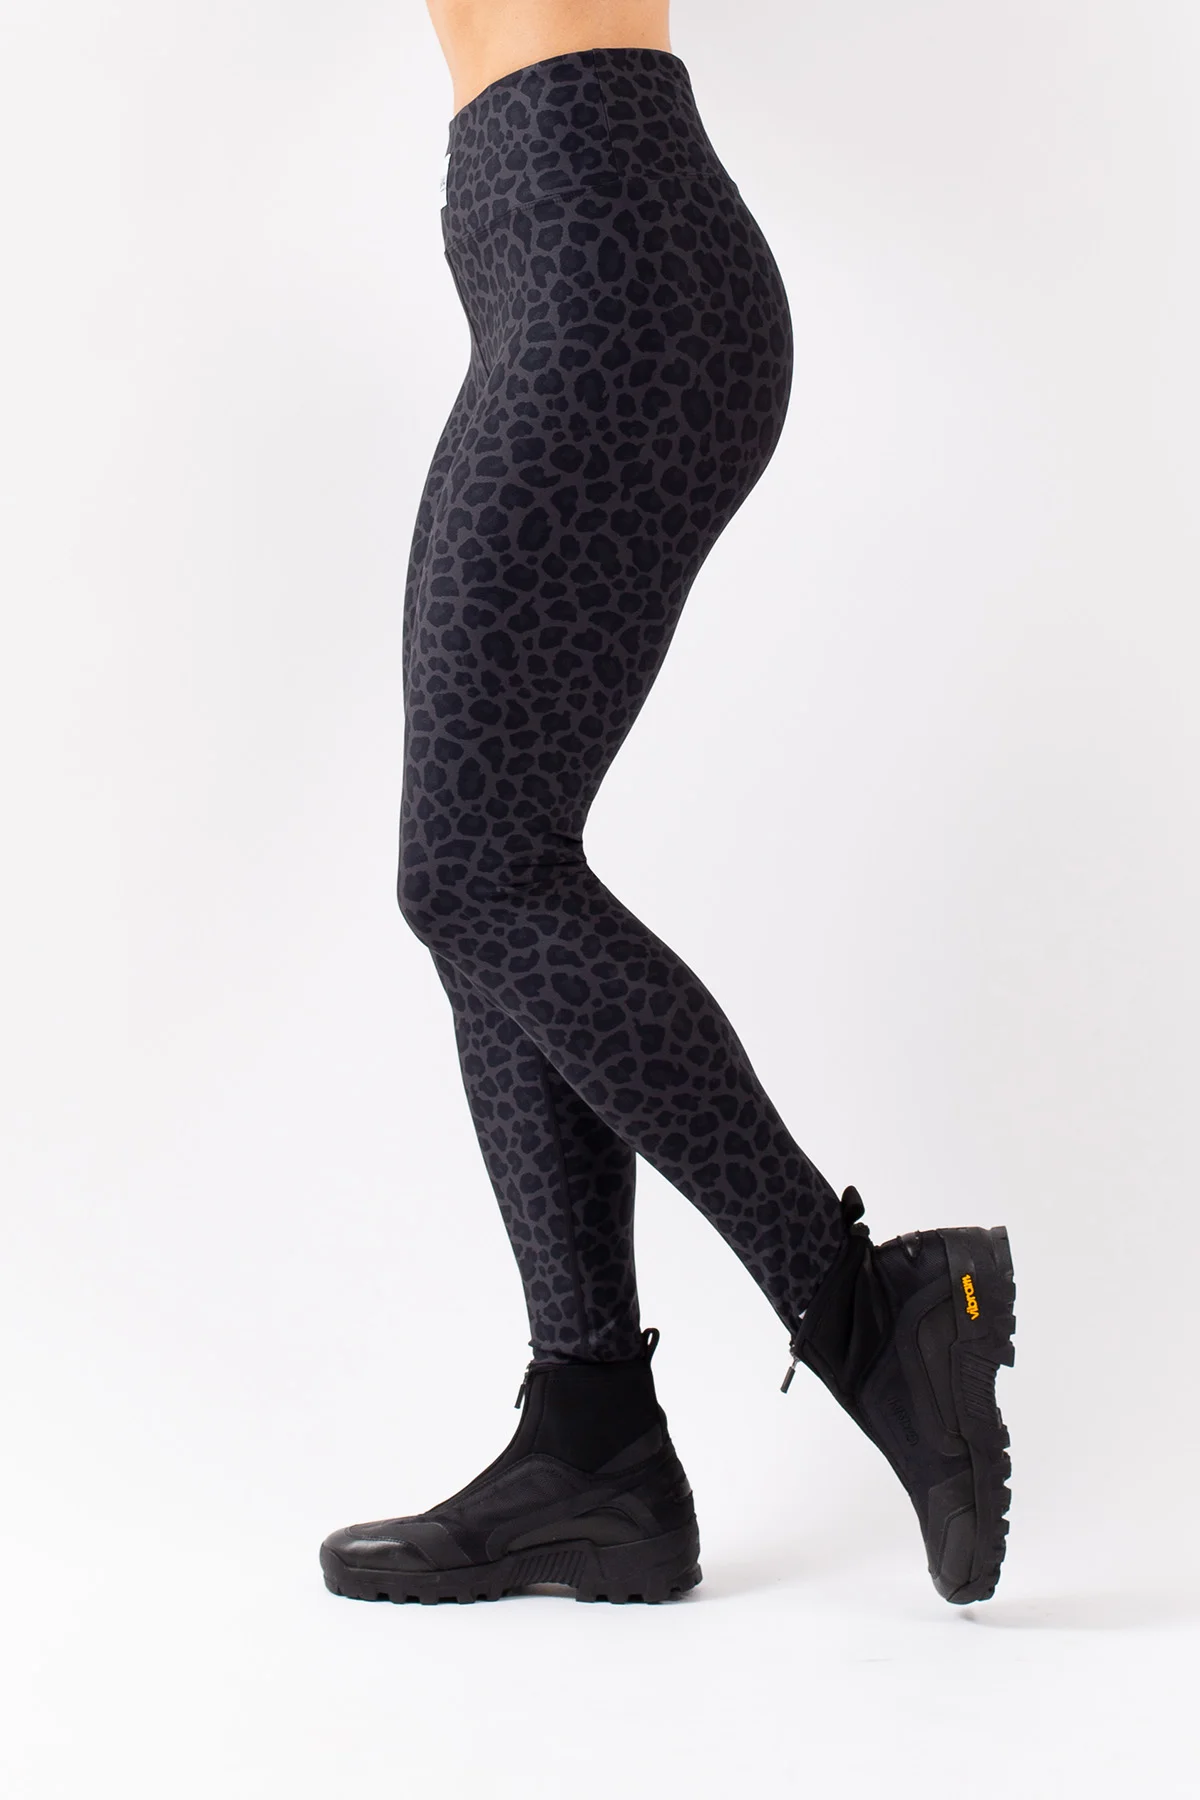 Women Gym Leggings Polyester With Phone Pocket- Leopard Print